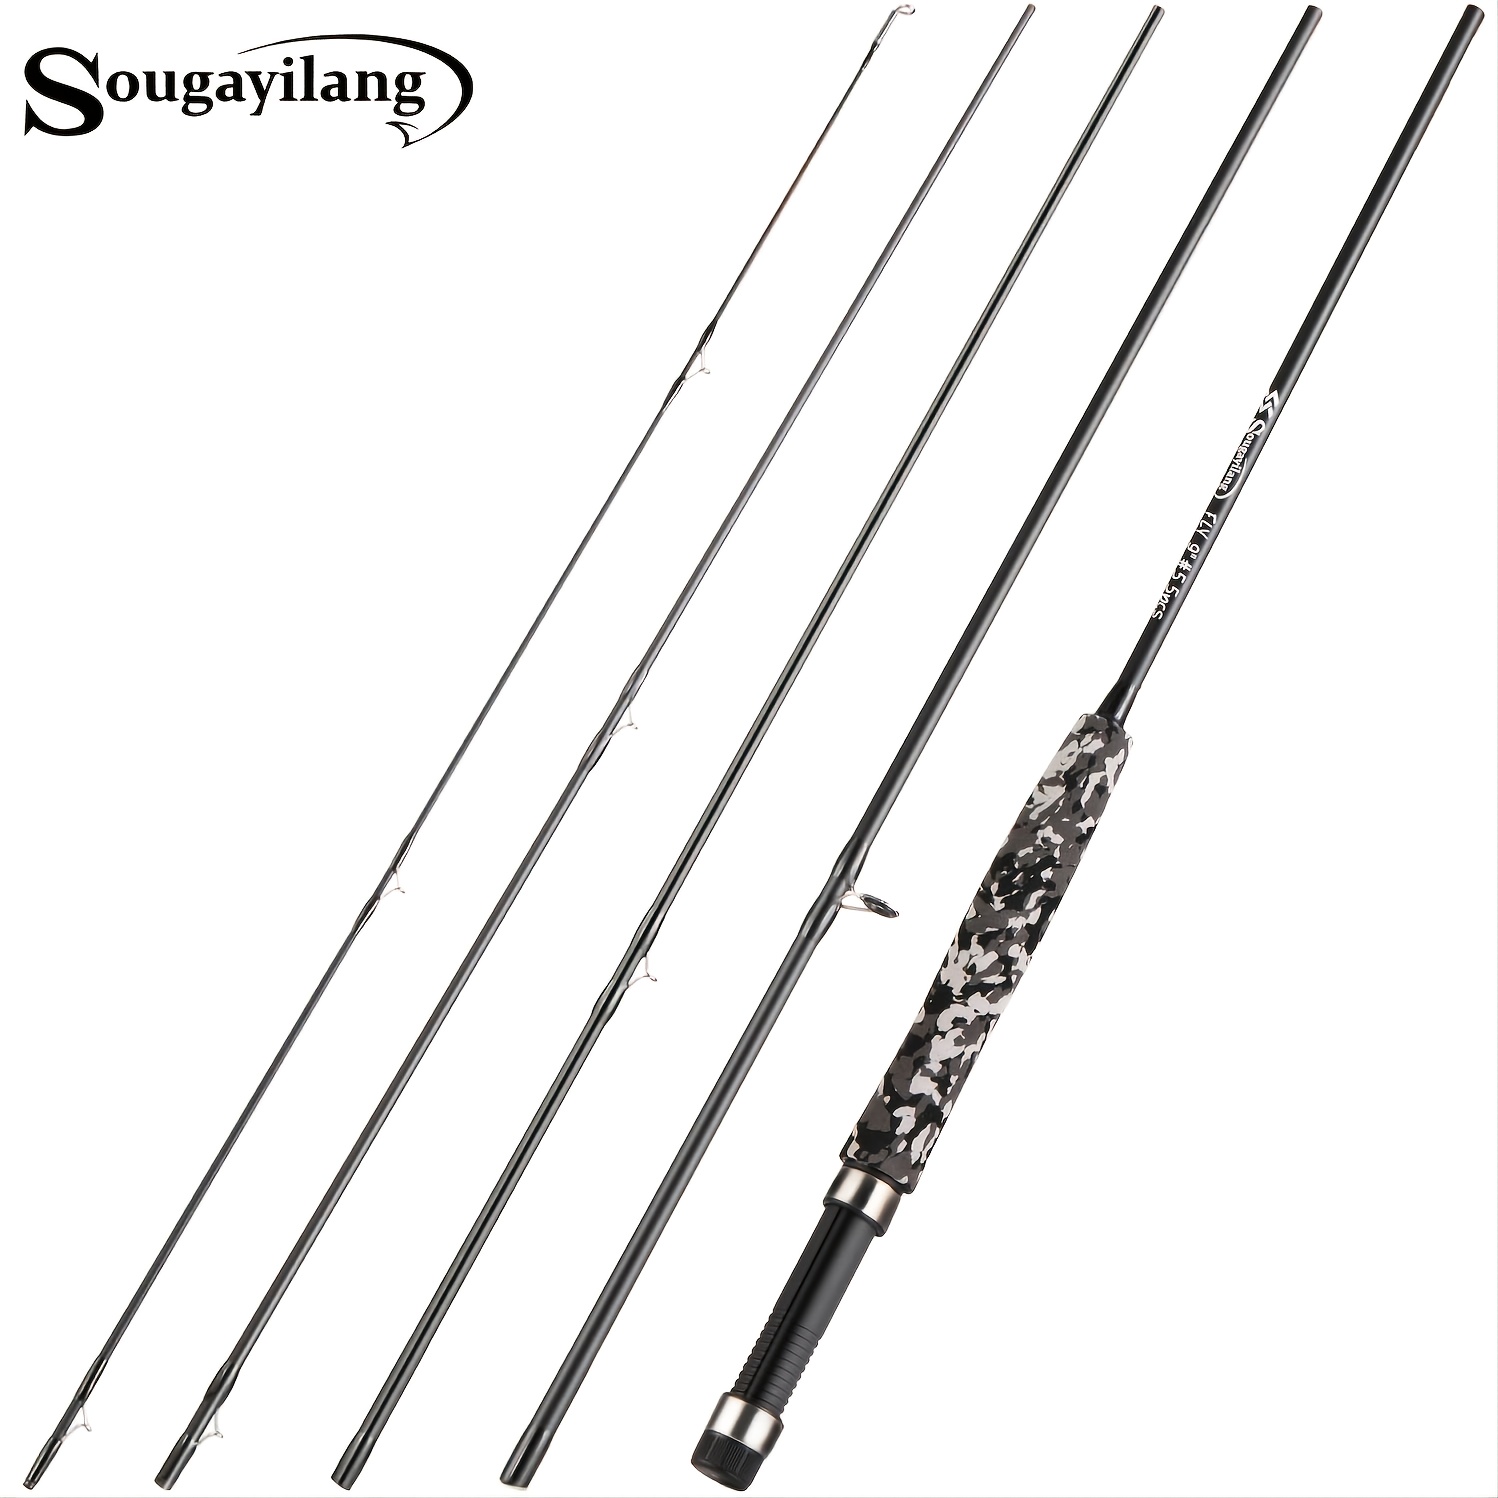 Sougayilang Carbon Fiber Fly Fishing Rod - Lightweight 5-Section Rod for  Easy Travel and Accurate Casting